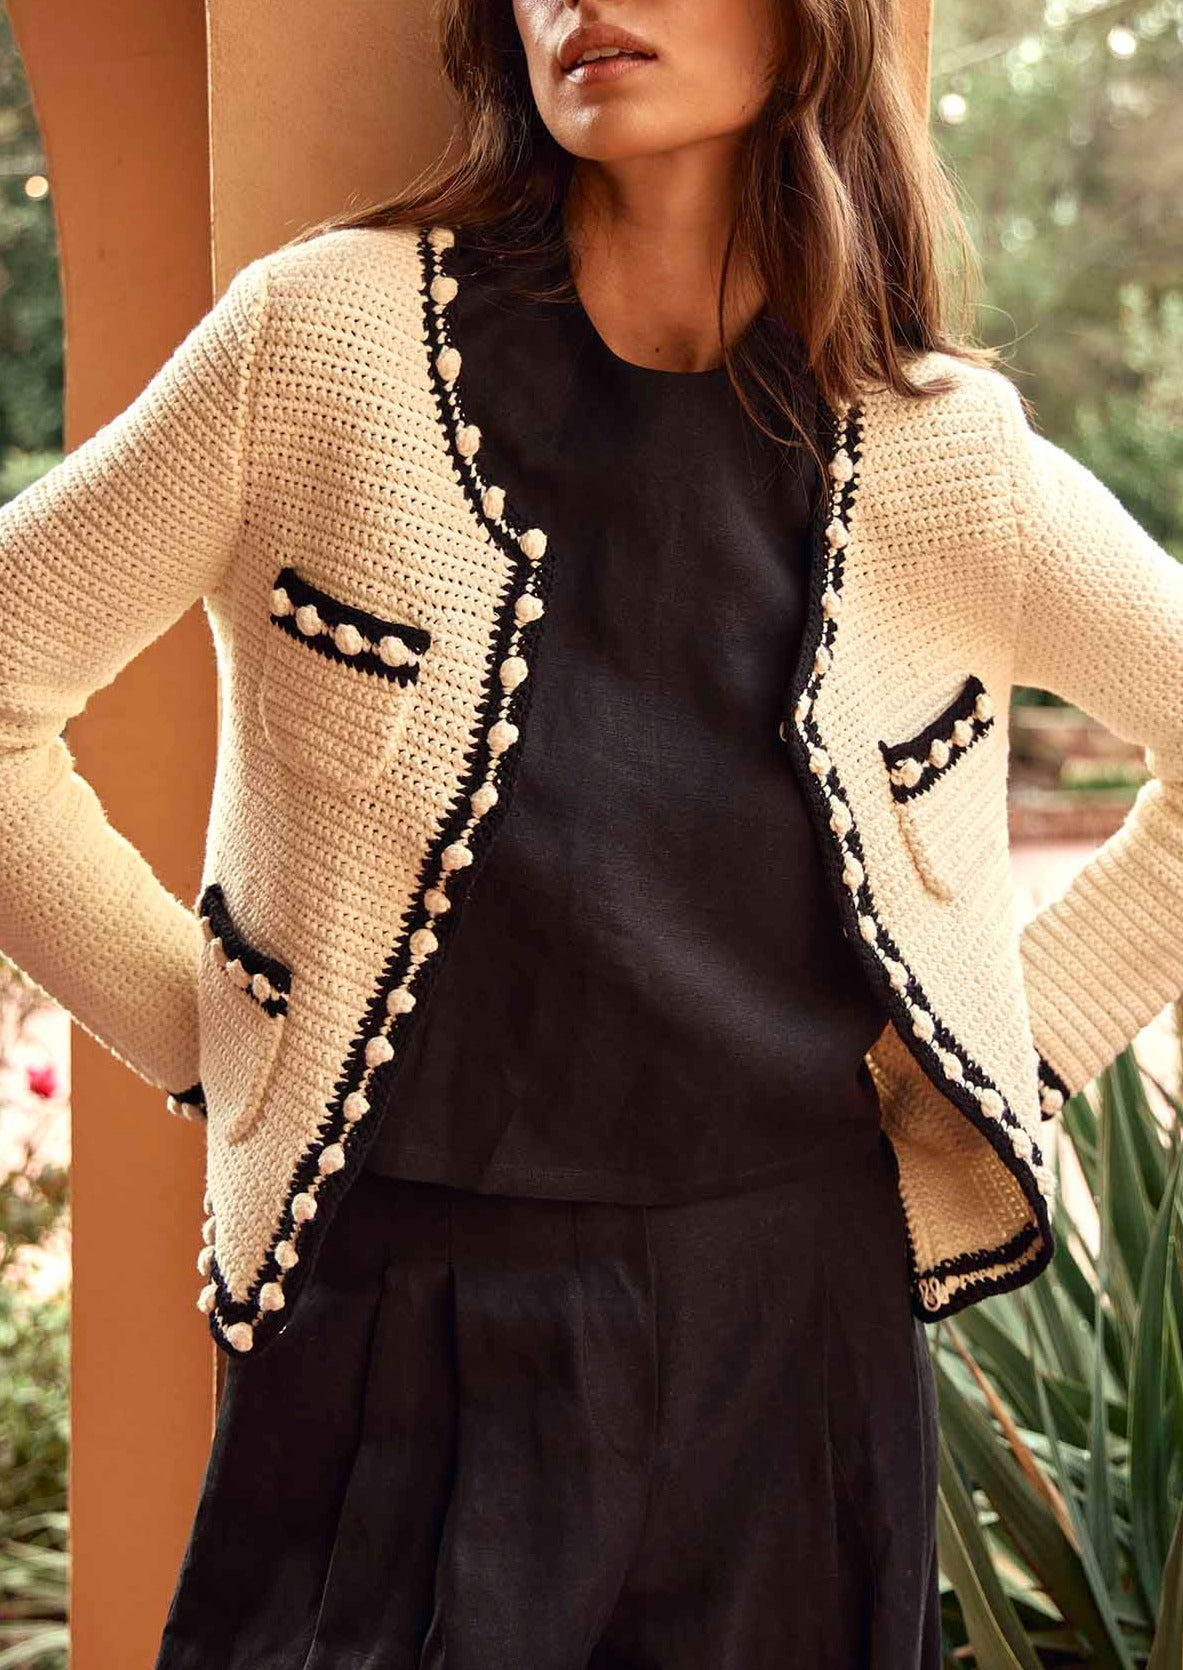 The Russell is an open front crochet jacket with ribbing at the placket, sleeve cuffs and hem.